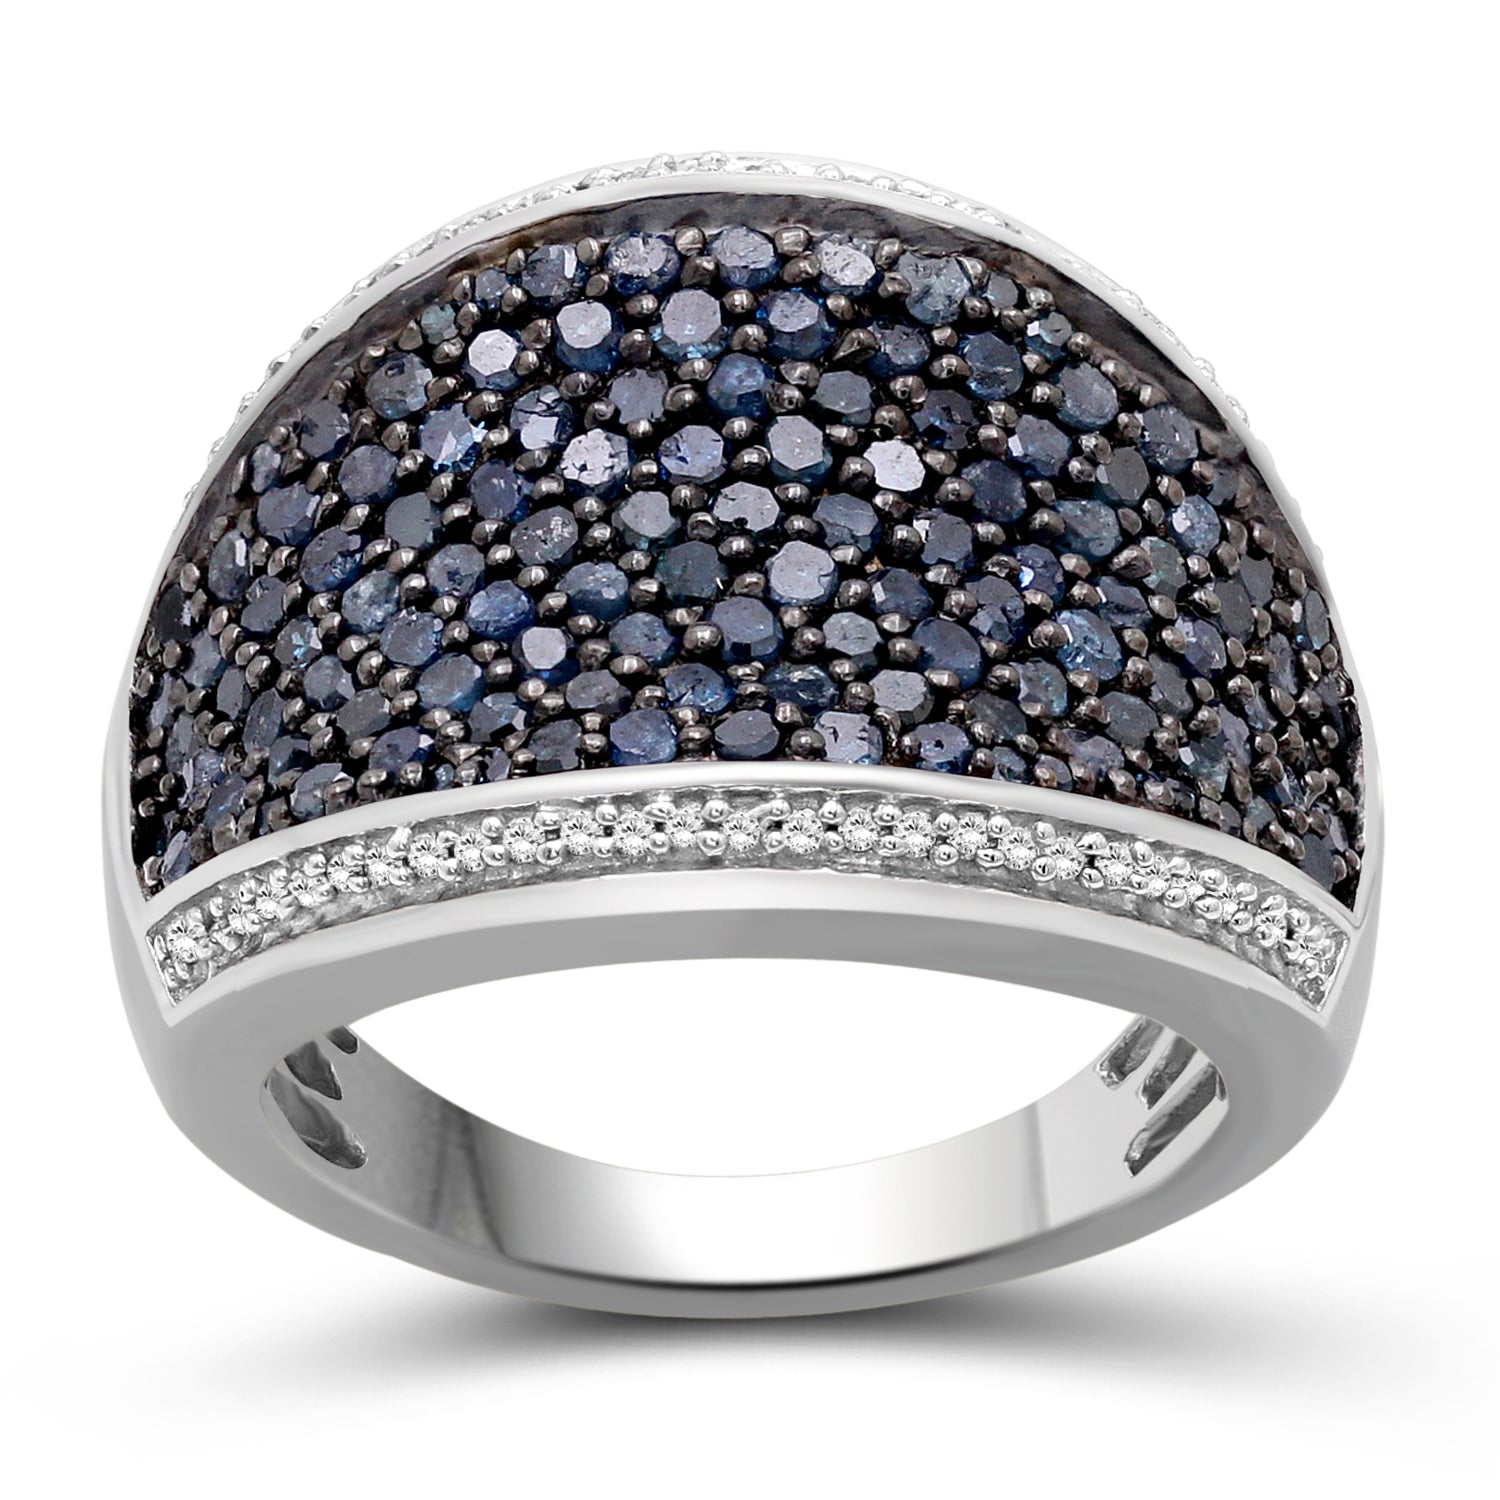 Sterling Silver Blue & White 2 Carat Diamond Ring for Women| Dual-Colored Ring Band with Round Diamonds